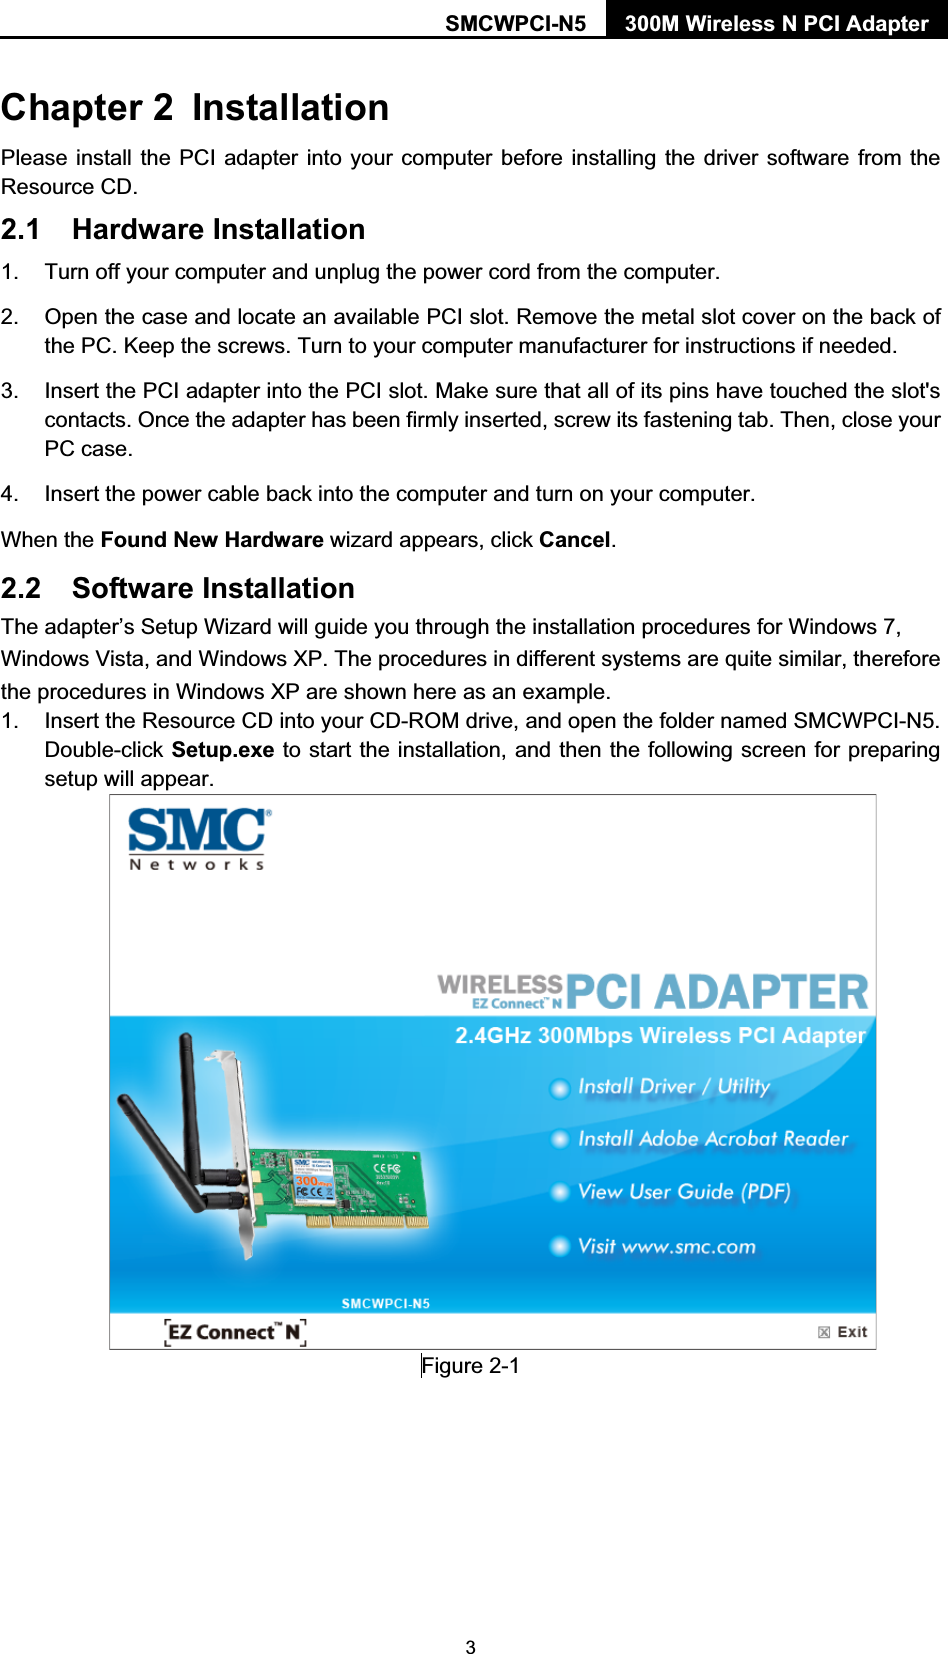 SMCWPCI-N5  300M Wireless N PCI Adapter  3 Chapter 2  Installation Please install the PCI adapter into your computer before installing the driver software from the Resource CD.   2.1 Hardware Installation 1.  Turn off your computer and unplug the power cord from the computer. 2.  Open the case and locate an available PCI slot. Remove the metal slot cover on the back of the PC. Keep the screws. Turn to your computer manufacturer for instructions if needed. 3.  Insert the PCI adapter into the PCI slot. Make sure that all of its pins have touched the slot&apos;s contacts. Once the adapter has been firmly inserted, screw its fastening tab. Then, close your PC case. 4.  Insert the power cable back into the computer and turn on your computer. When the Found New Hardware wizard appears, click Cancel.  2.2 Software Installation The adapter’s Setup Wizard will guide you through the installation procedures for Windows 7, Windows Vista, and Windows XP. The procedures in different systems are quite similar, therefore the procedures in Windows XP are shown here as an example.   1.  Insert the Resource CD into your CD-ROM drive, and open the folder named SMCWPCI-N5. Double-click Setup.exe to start the installation, and then the following screen for preparing setup will appear.   Figure 2-1         